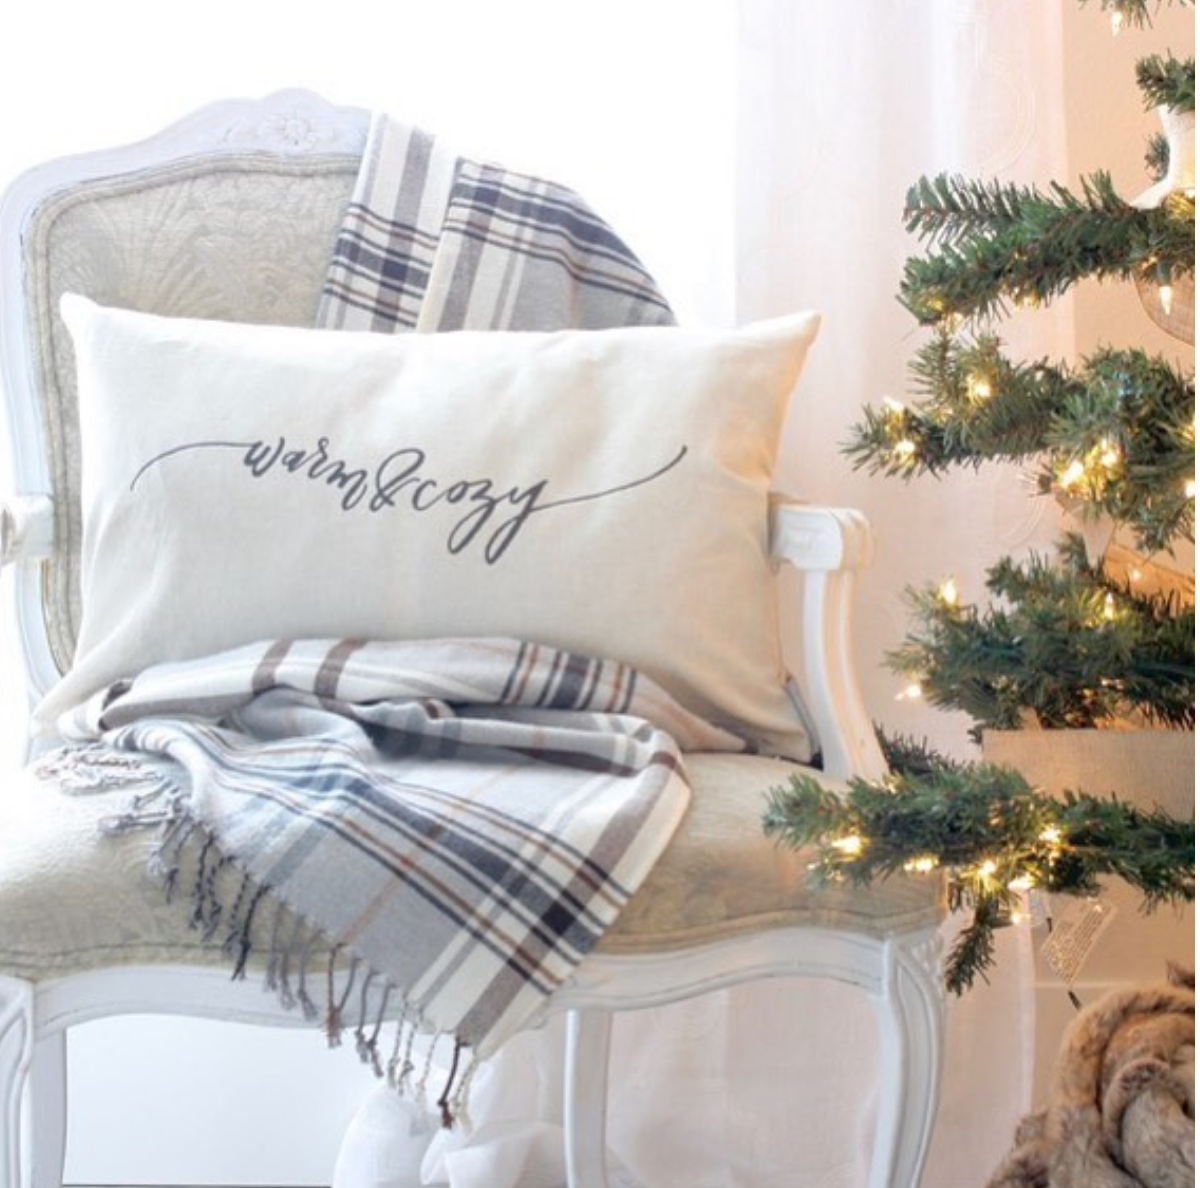 Declutter Week: 9 Things to Clean & Organize Between Christmas and New Year’s Day